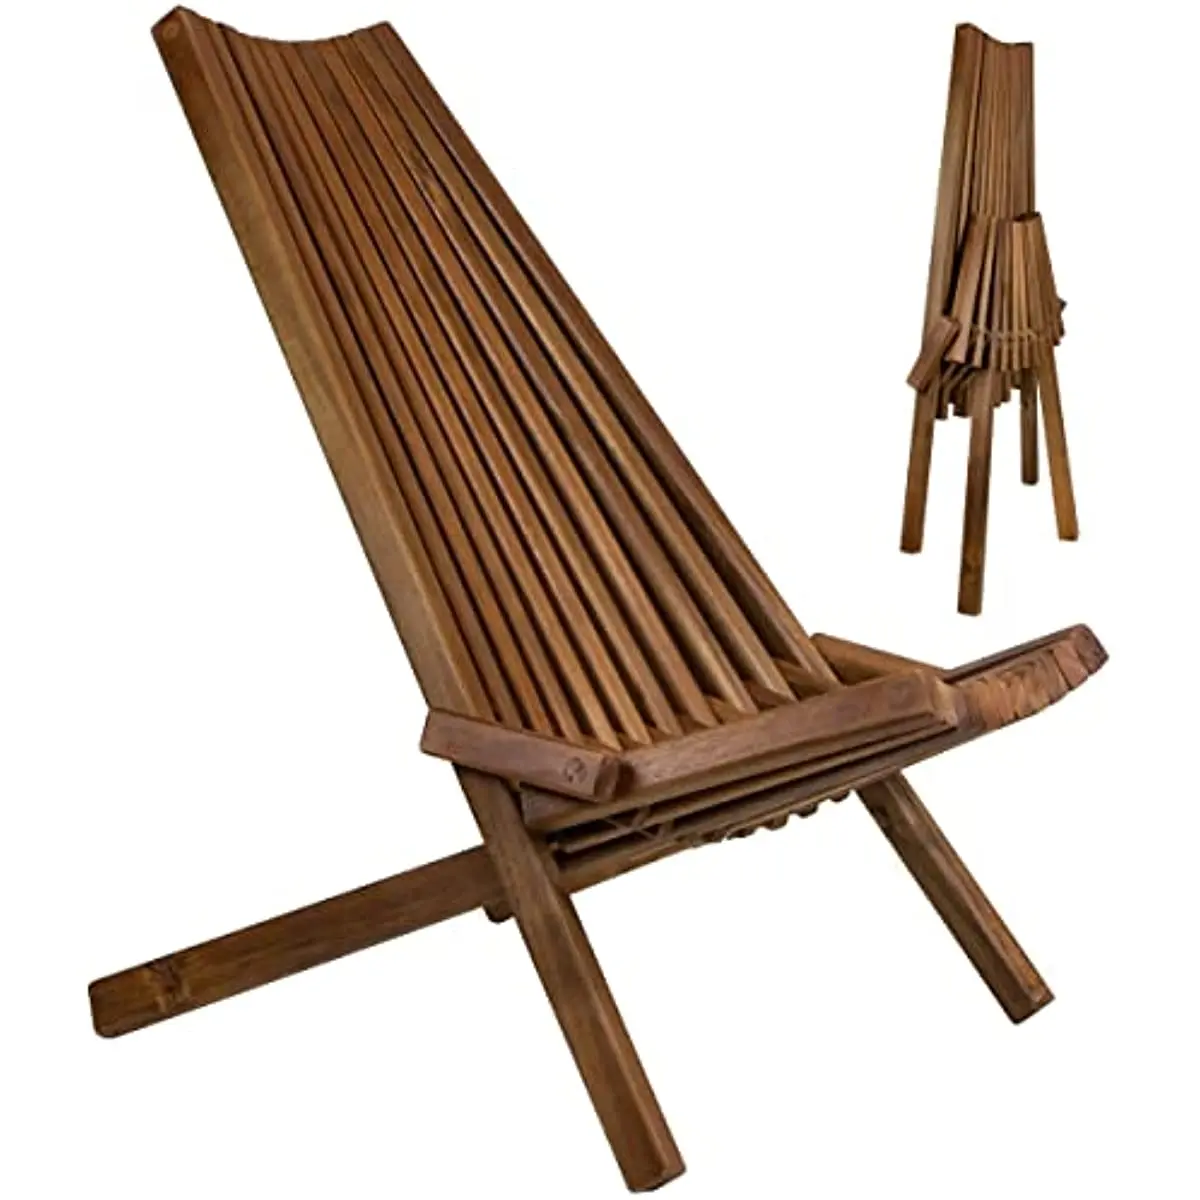 

Tamarack Folding Wooden Outdoor Chair -Stylish Low Profile Acacia Wood Lounge Chair for the Patio, Porch, Lawn, Garden or Home